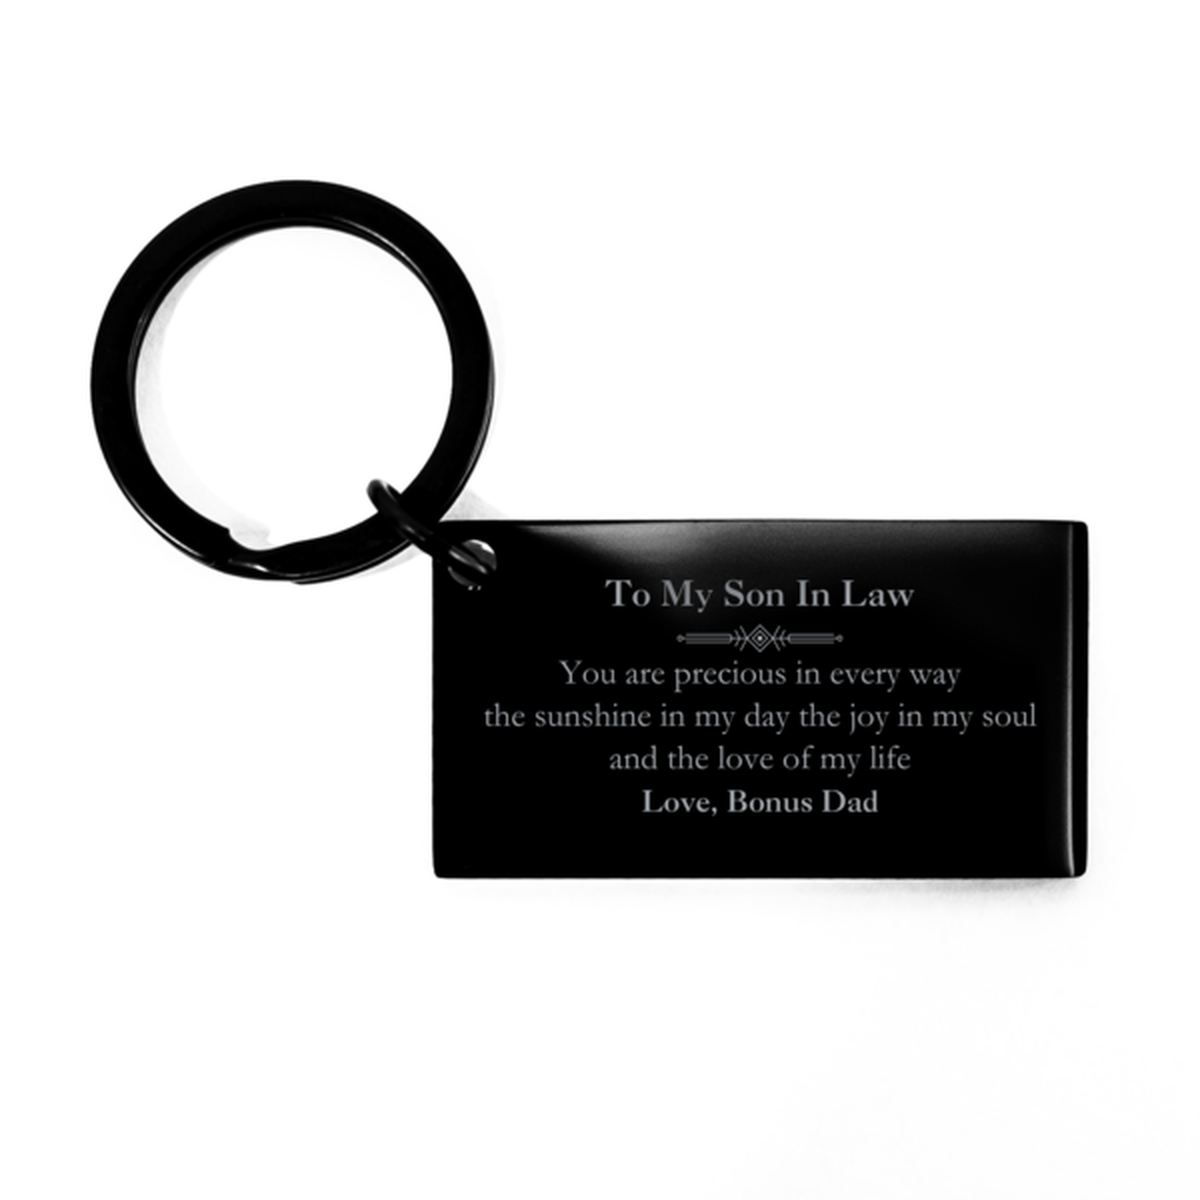 Graduation Gifts for Son In Law Keychain Present from Bonus Dad, Christmas Son In Law Birthday Gifts Son In Law You are precious in every way the sunshine in my day. Love, Bonus Dad